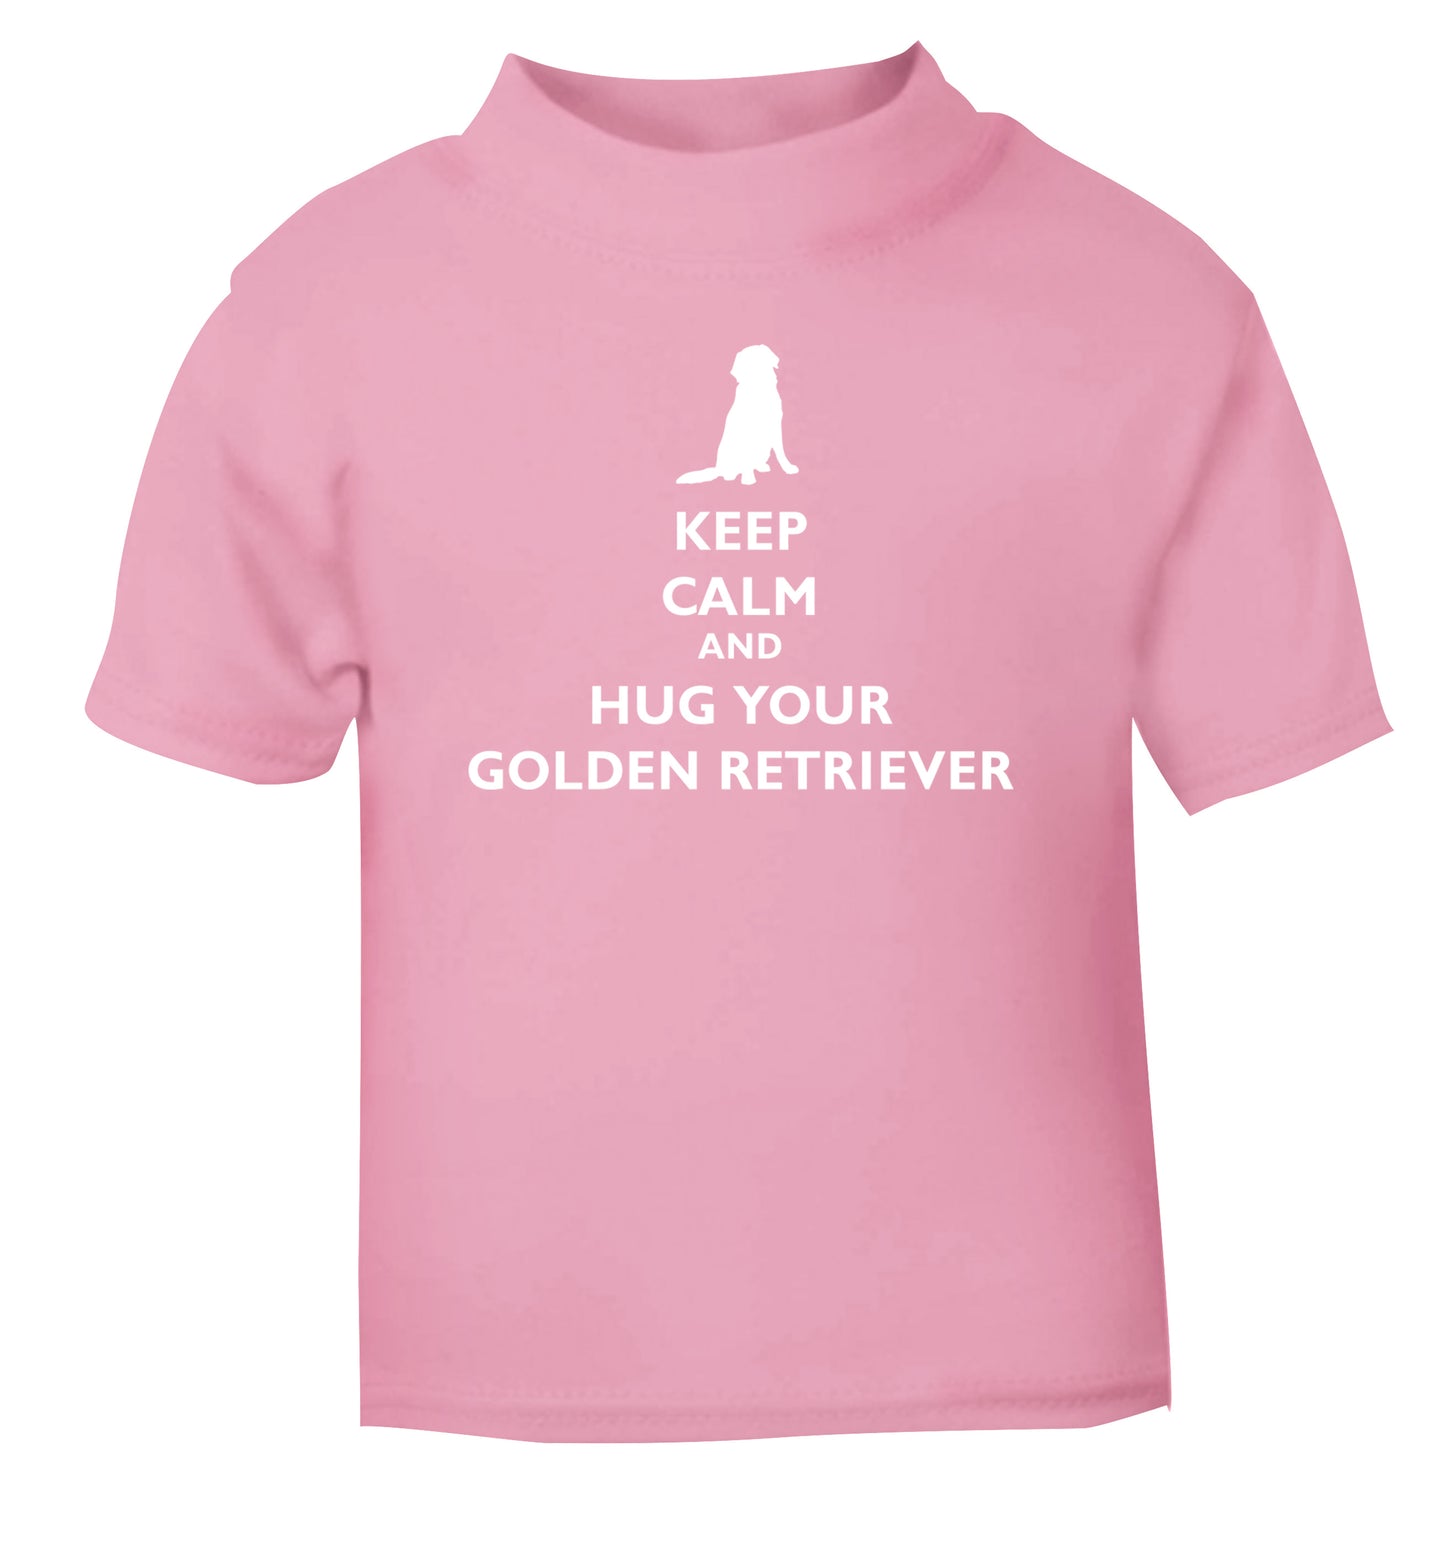 Keep calm and hug your golden retriever light pink Baby Toddler Tshirt 2 Years